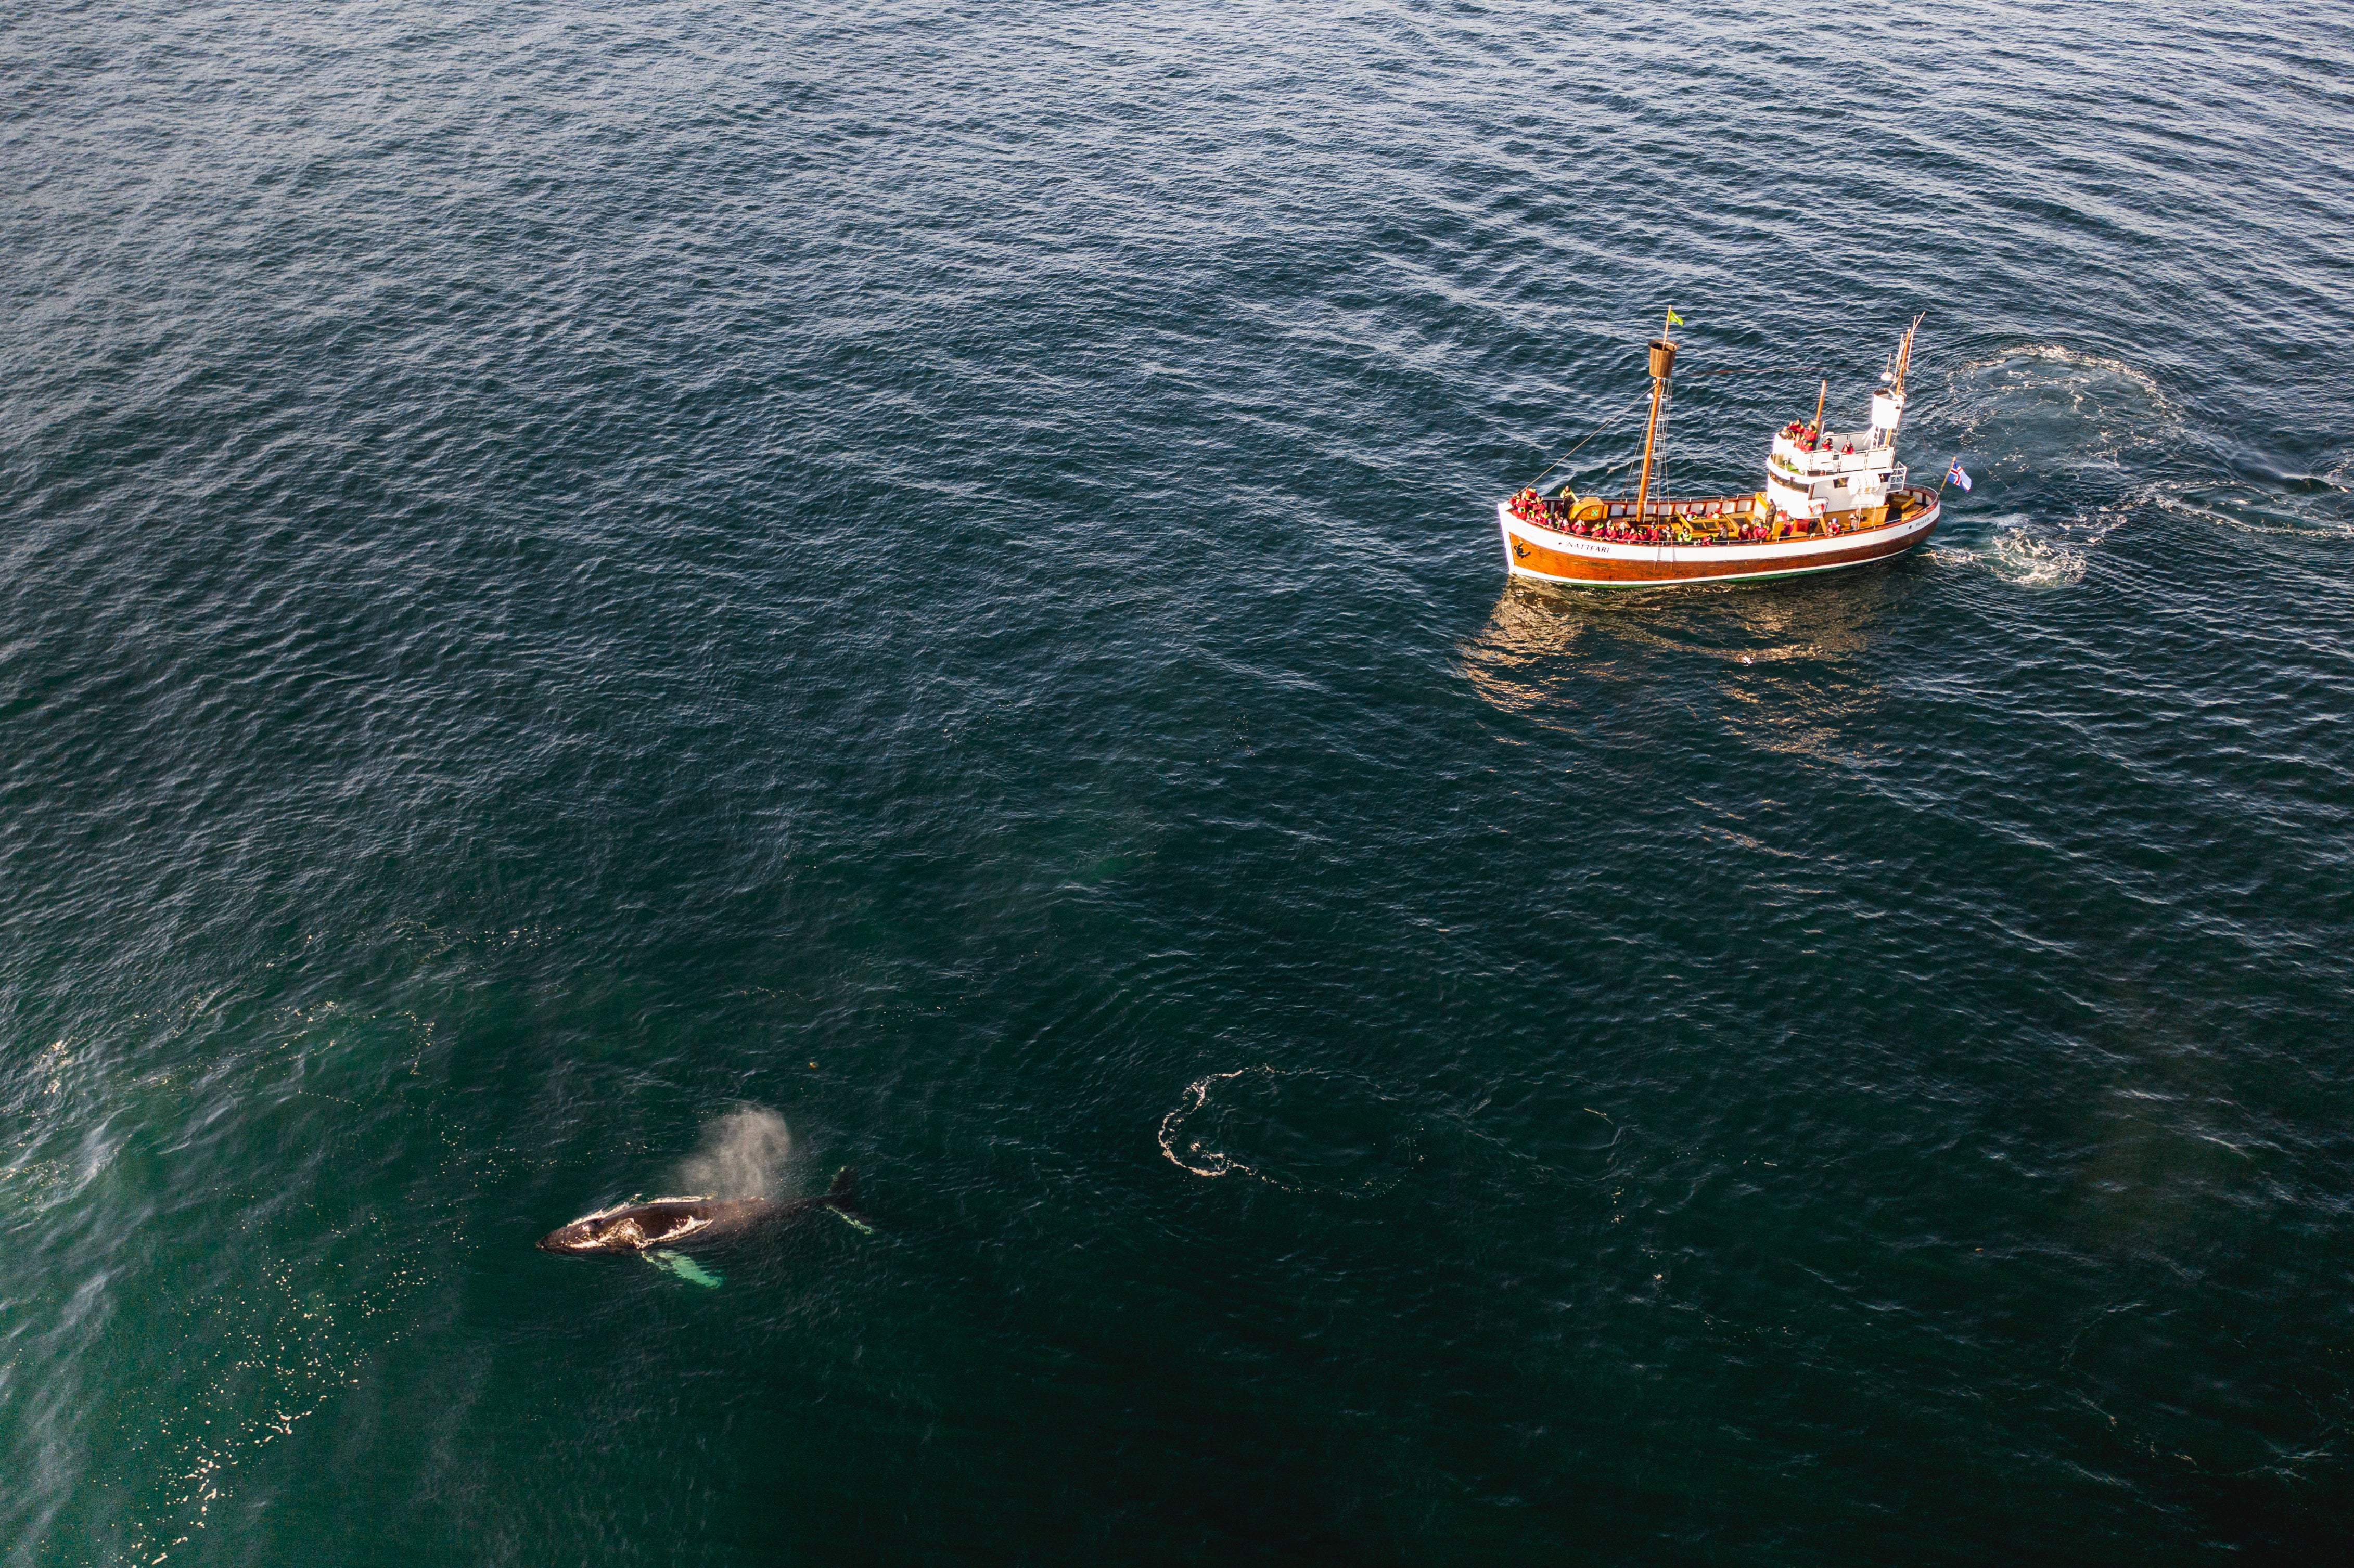 Husavik is known as one of the best places for whale-watching in Europe